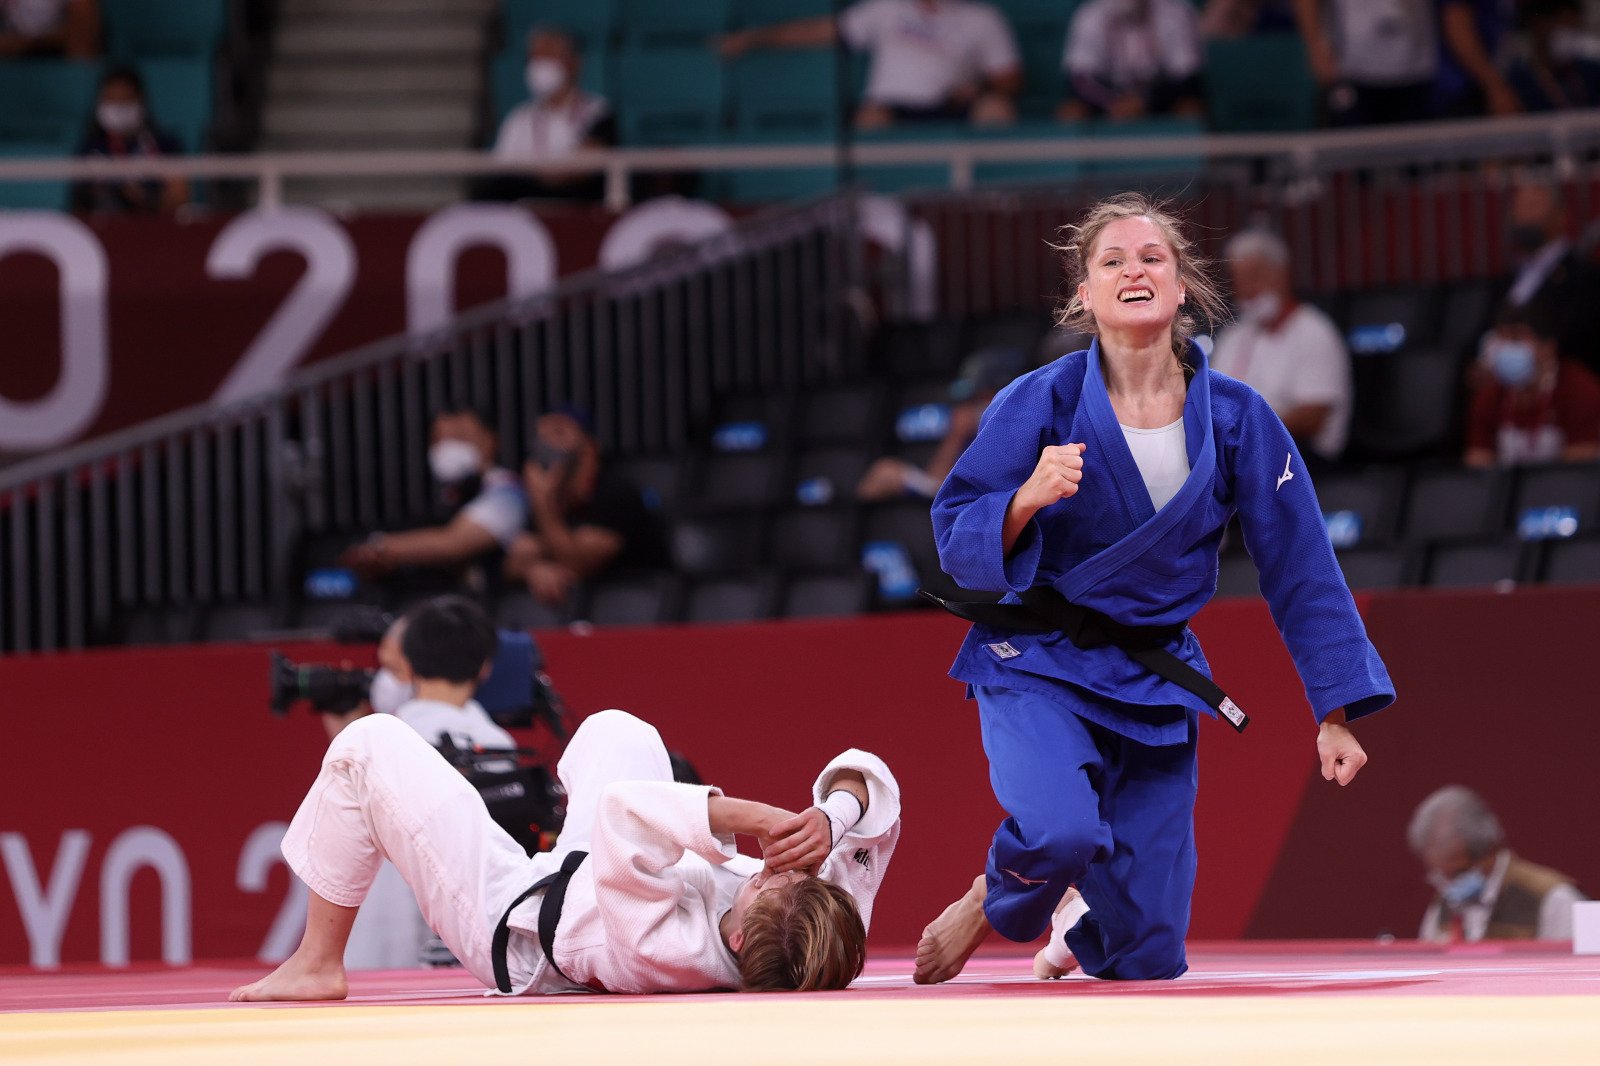 DAY TWO PRELIMINARIES: STRONG OLYMPIC PERFORMANCES IN -52KG AND -66KG